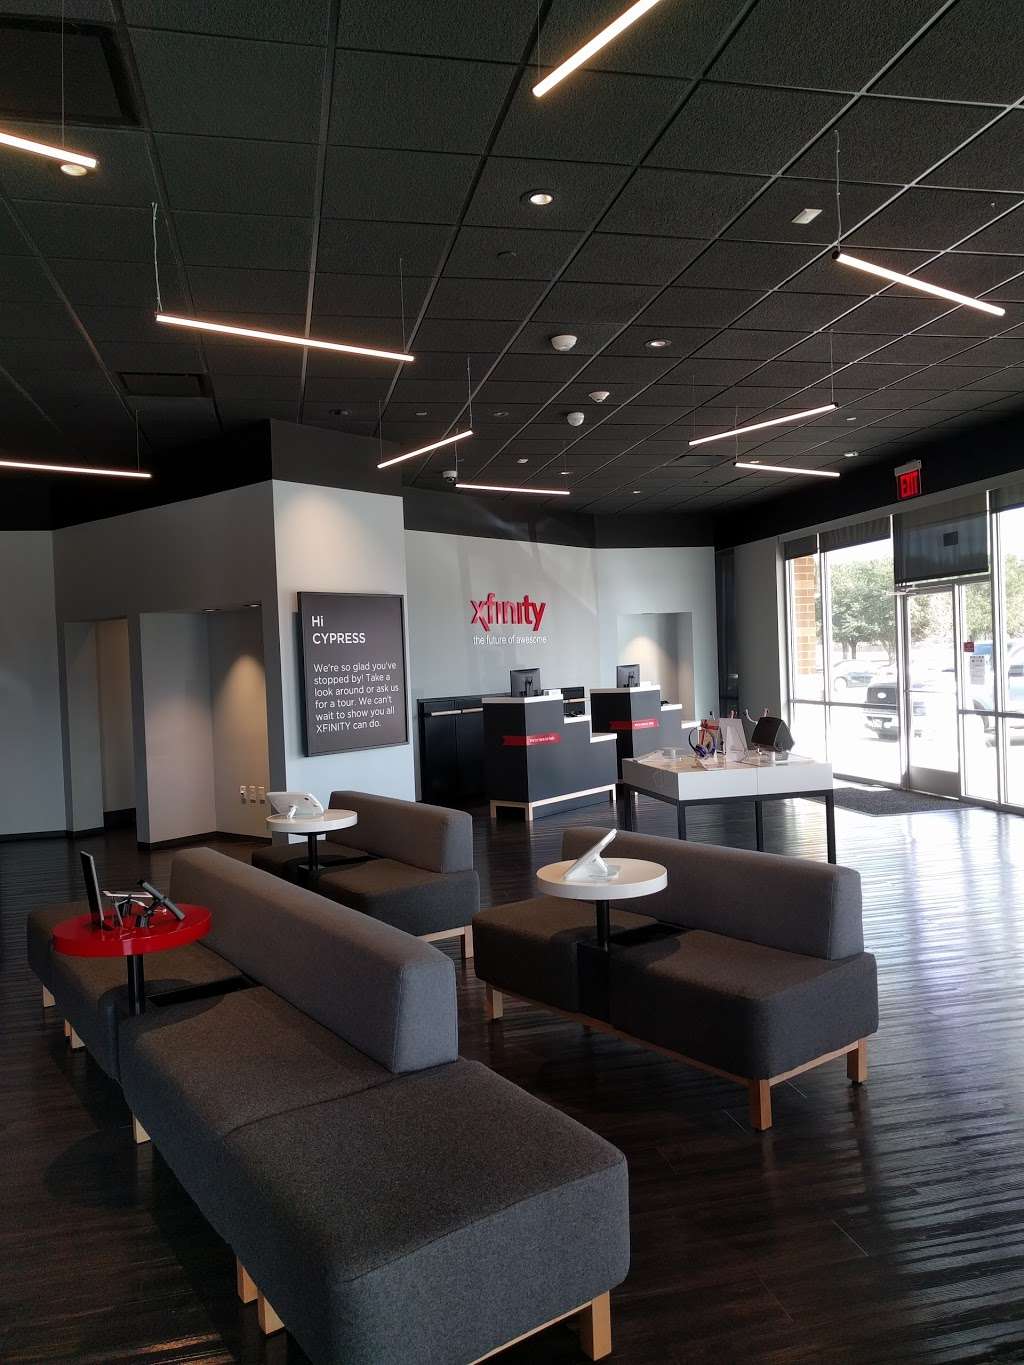 Xfinity Store by Comcast | 15055 Fairfield Meadows Dr Suite 200, Cypress, TX 77433, USA | Phone: (800) 934-6489